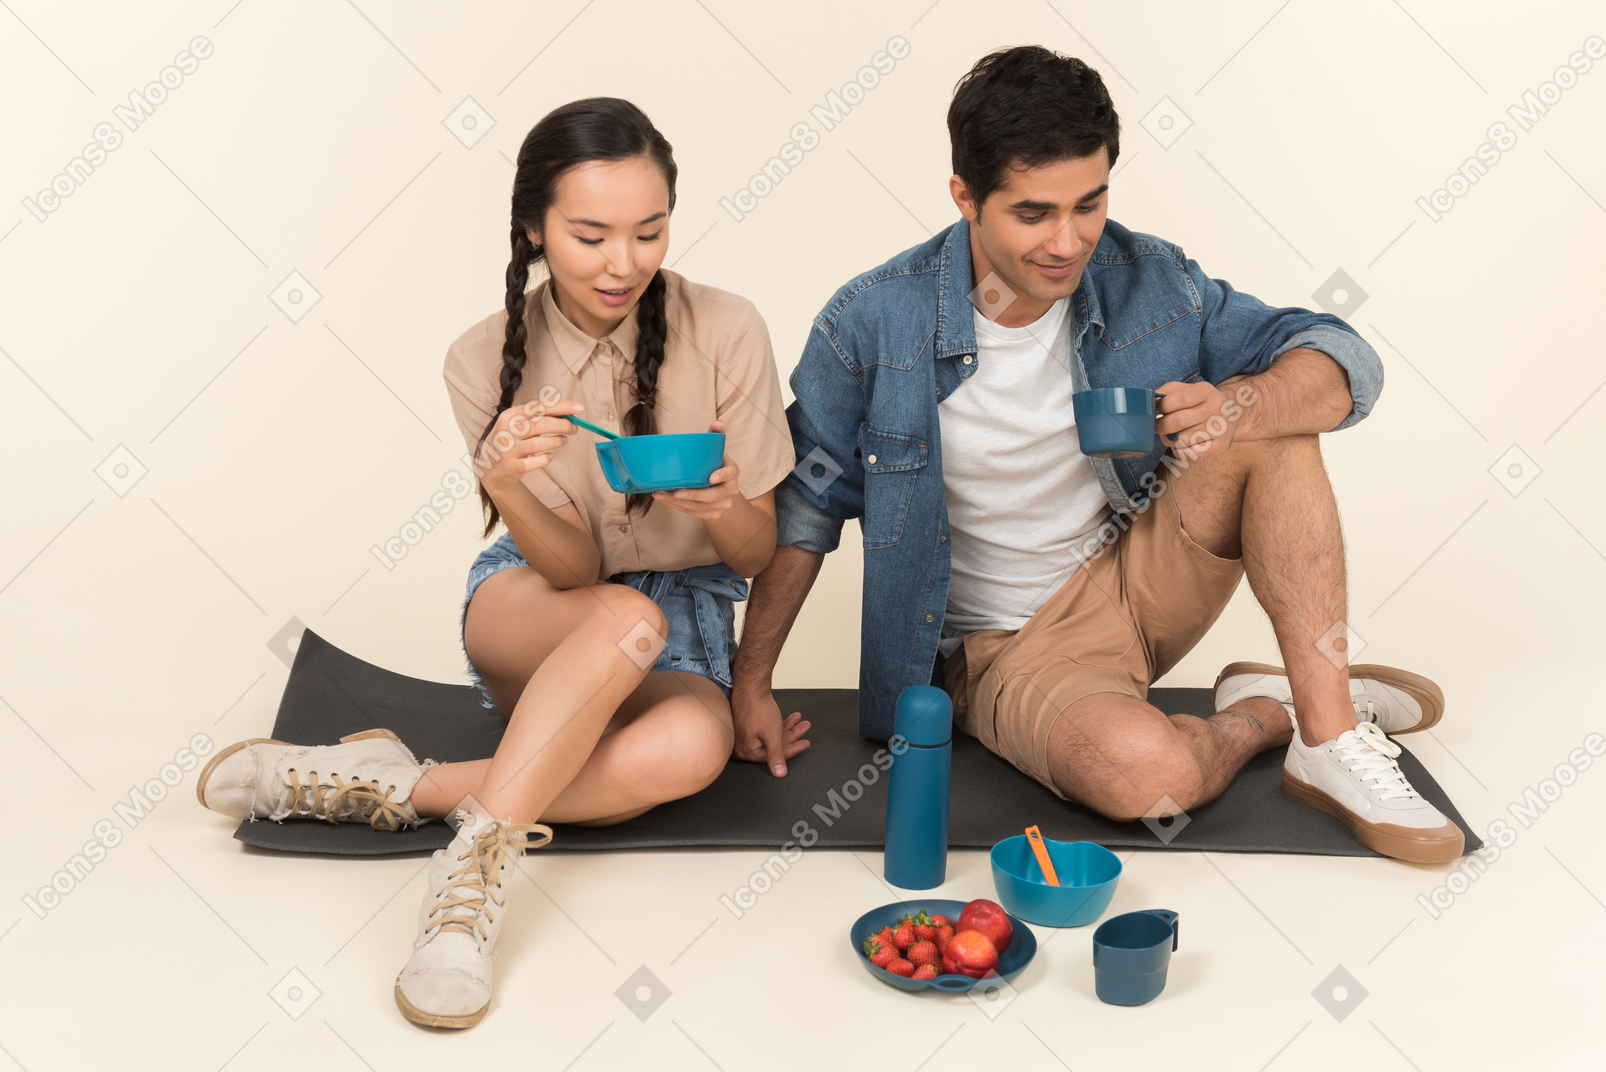 Young interracial couple sitting on karimat and eating